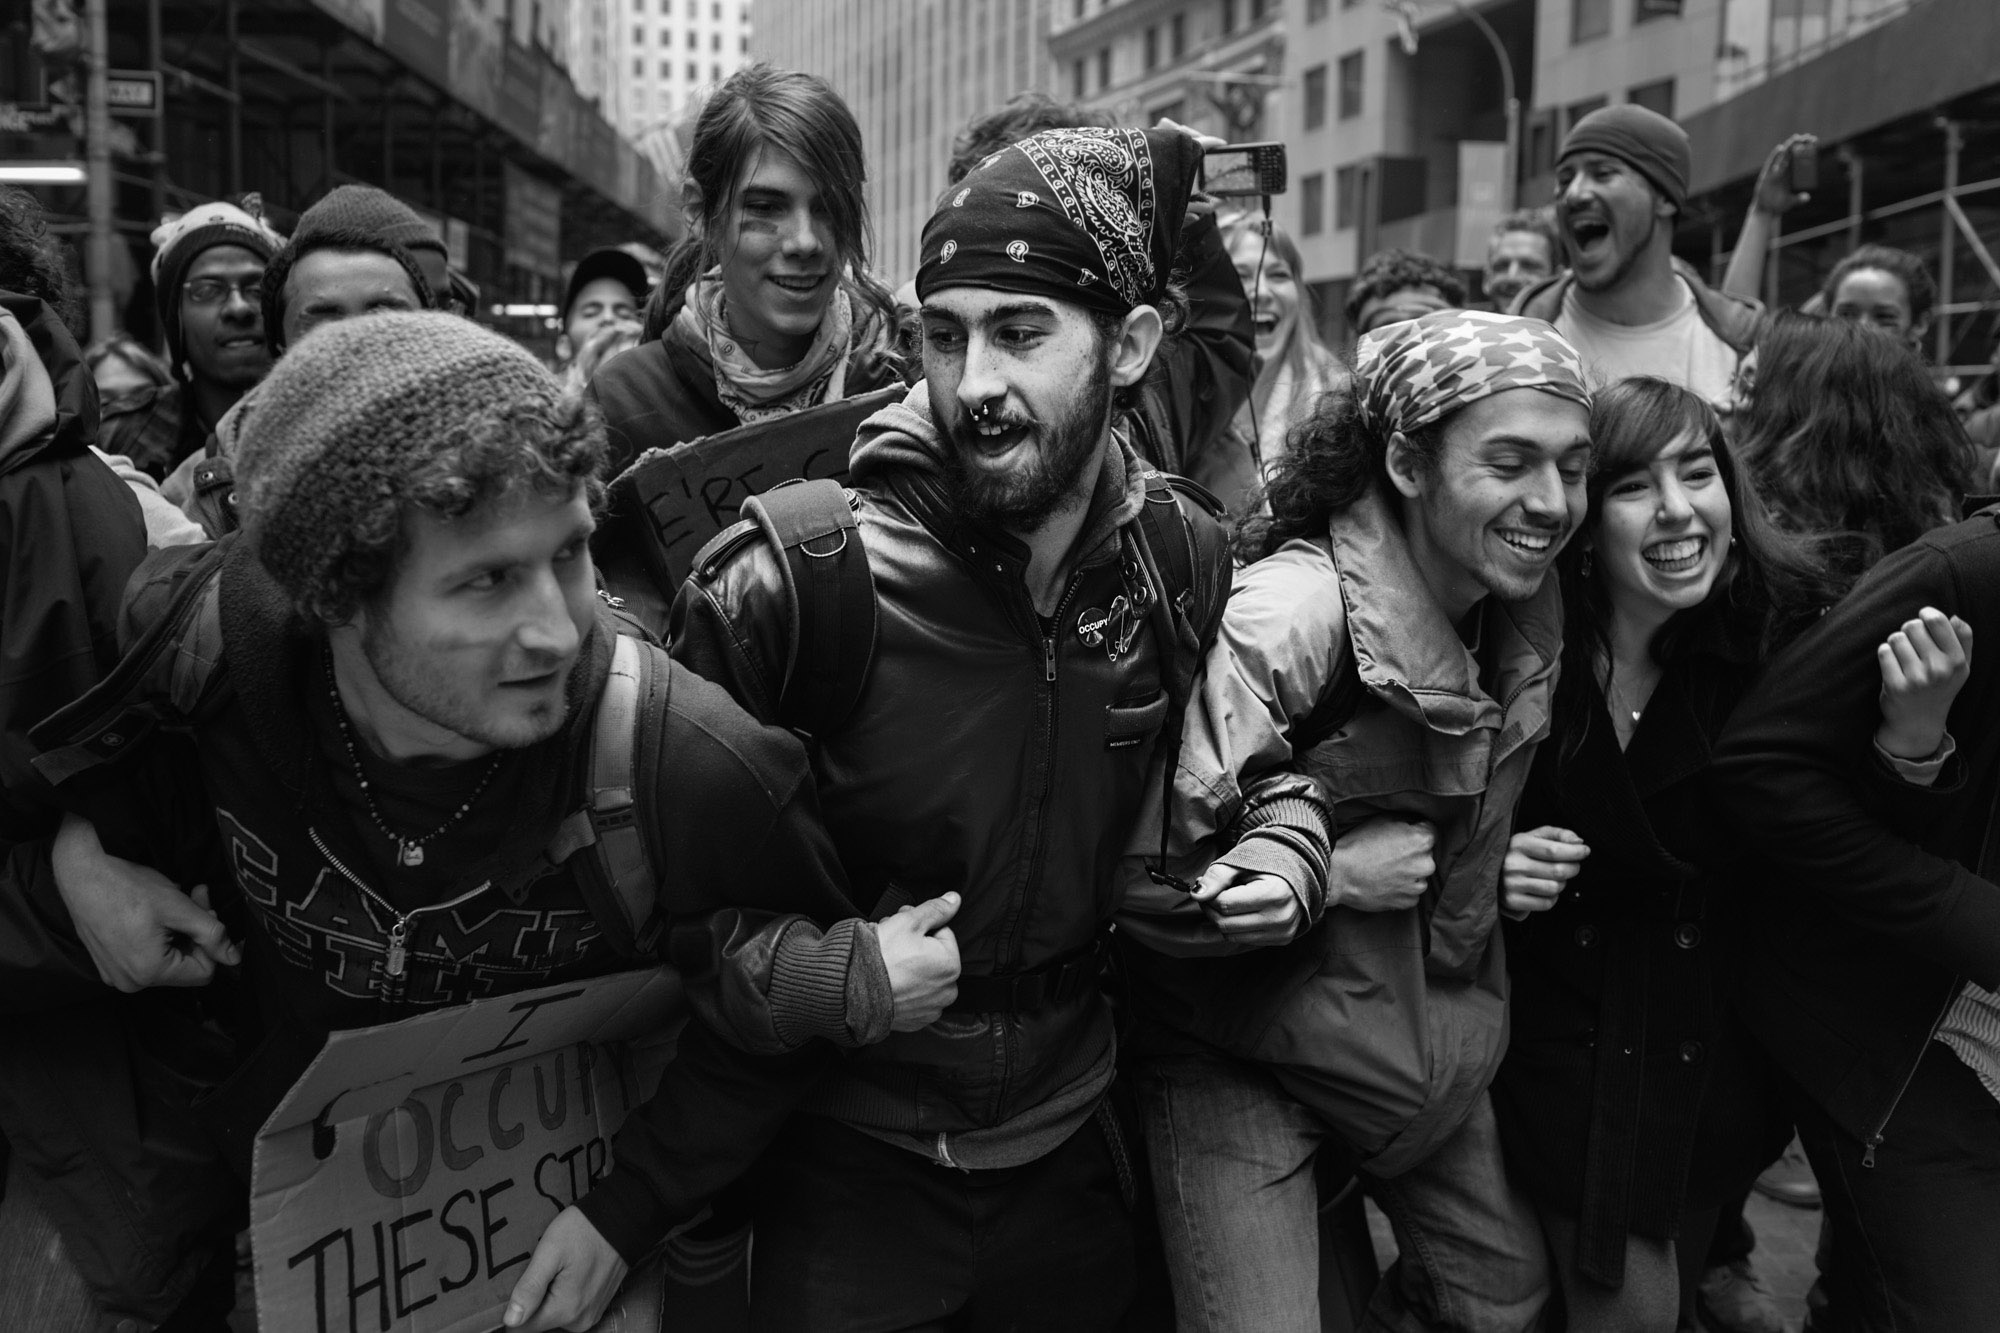  OWS protestors link arms to avoid people being singled out and arrested during a demonstration. 